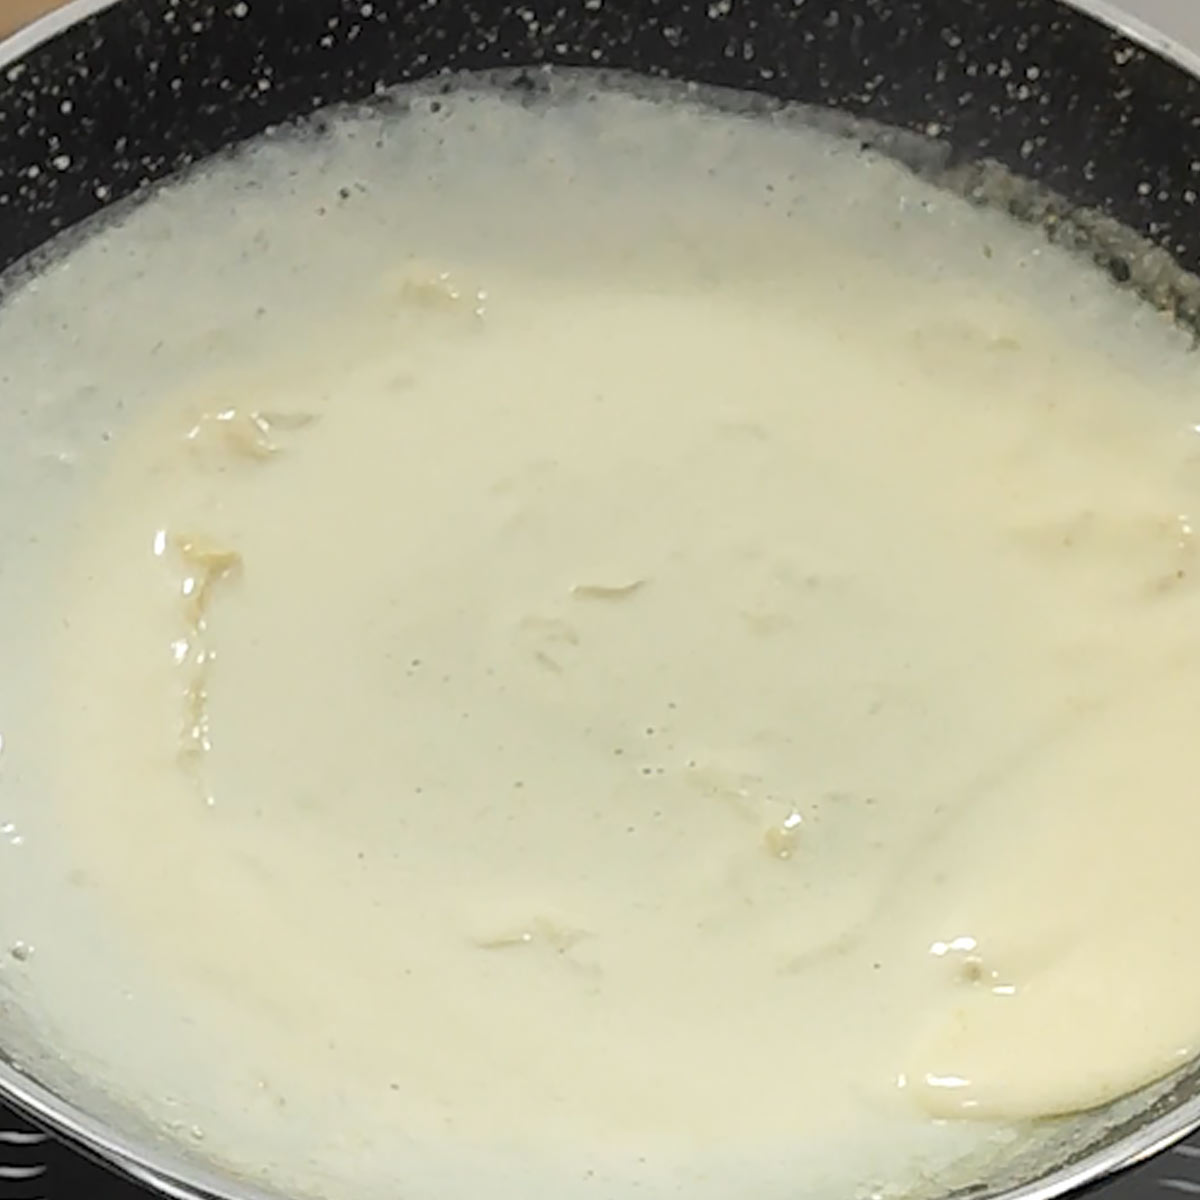 move around the skillet to spread the crepe batter